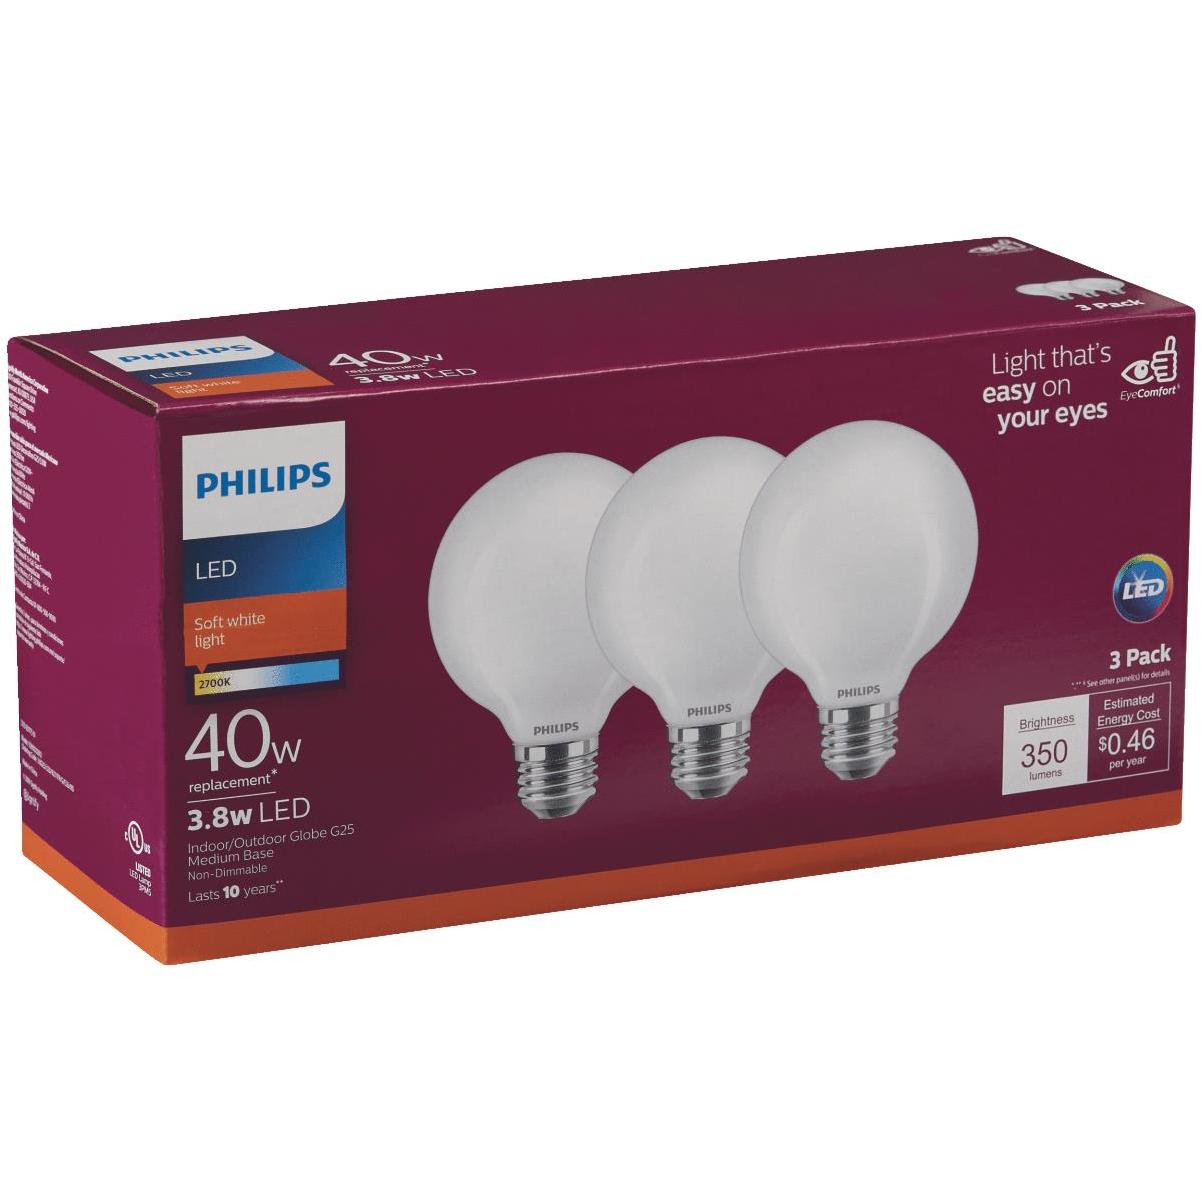 Beneficiary Production article HARDWARE WHOLESALERS INC. Philips 40W Equivalent Soft White G25 Medium  Frosted LED Decorative Light Bulb (3-Pack) | McDaniel's Hardware